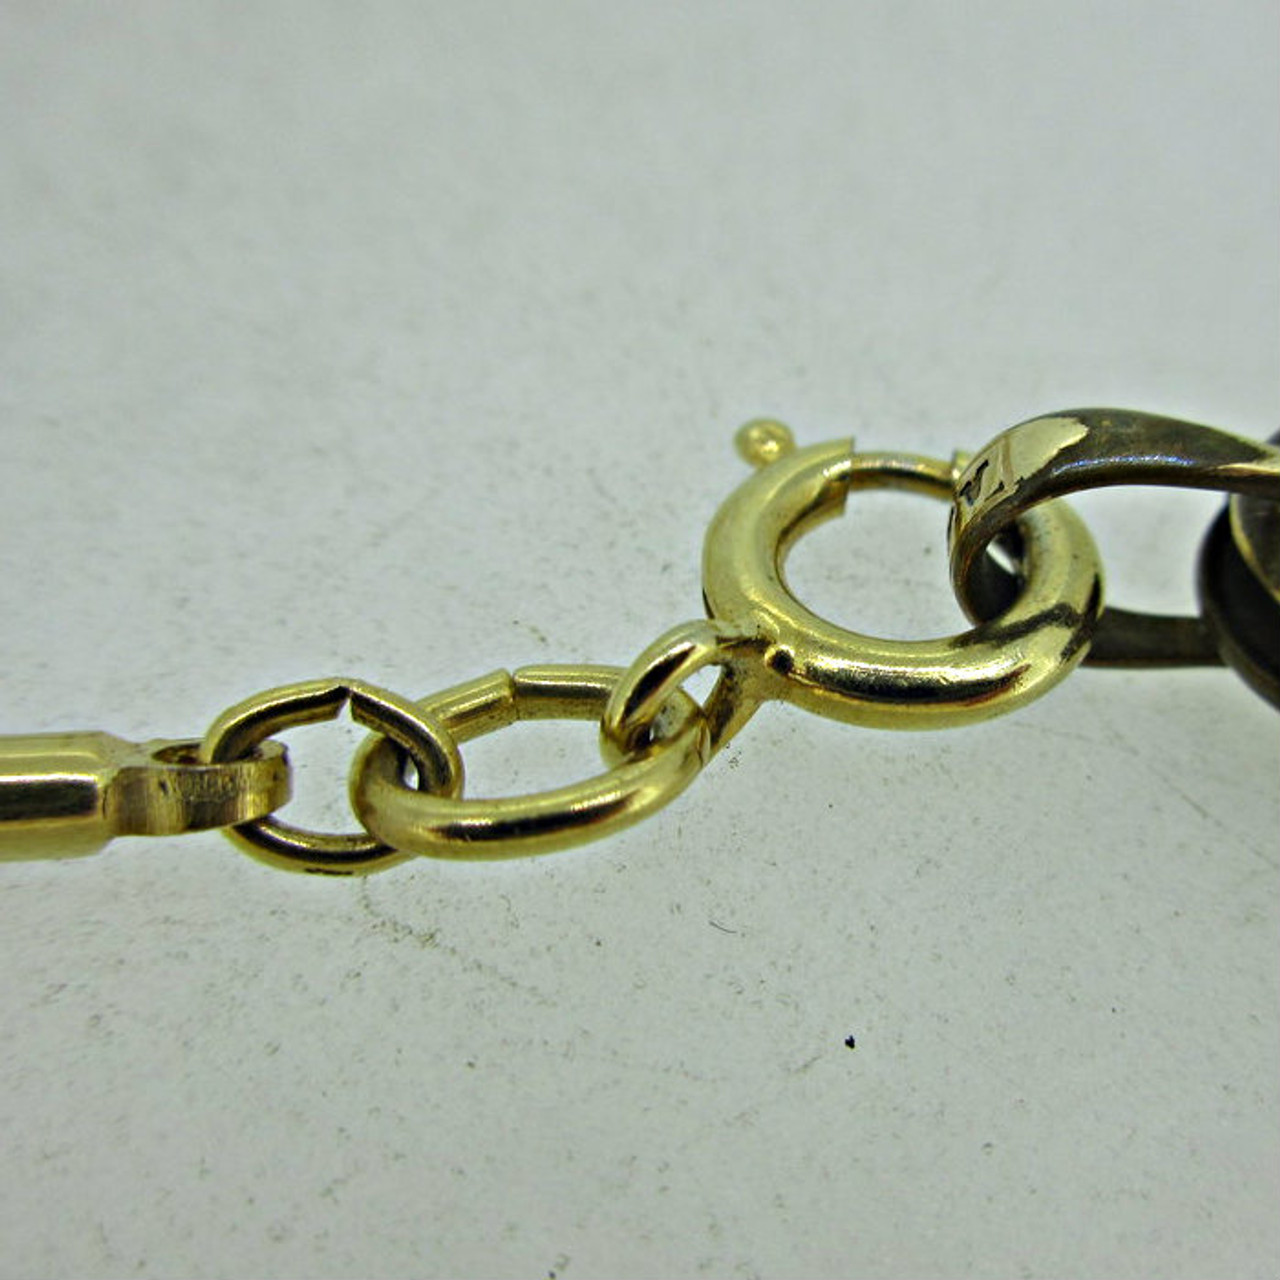 Vintage Swank Gold Filled or Plated Pocket Watch Chain (B13732)